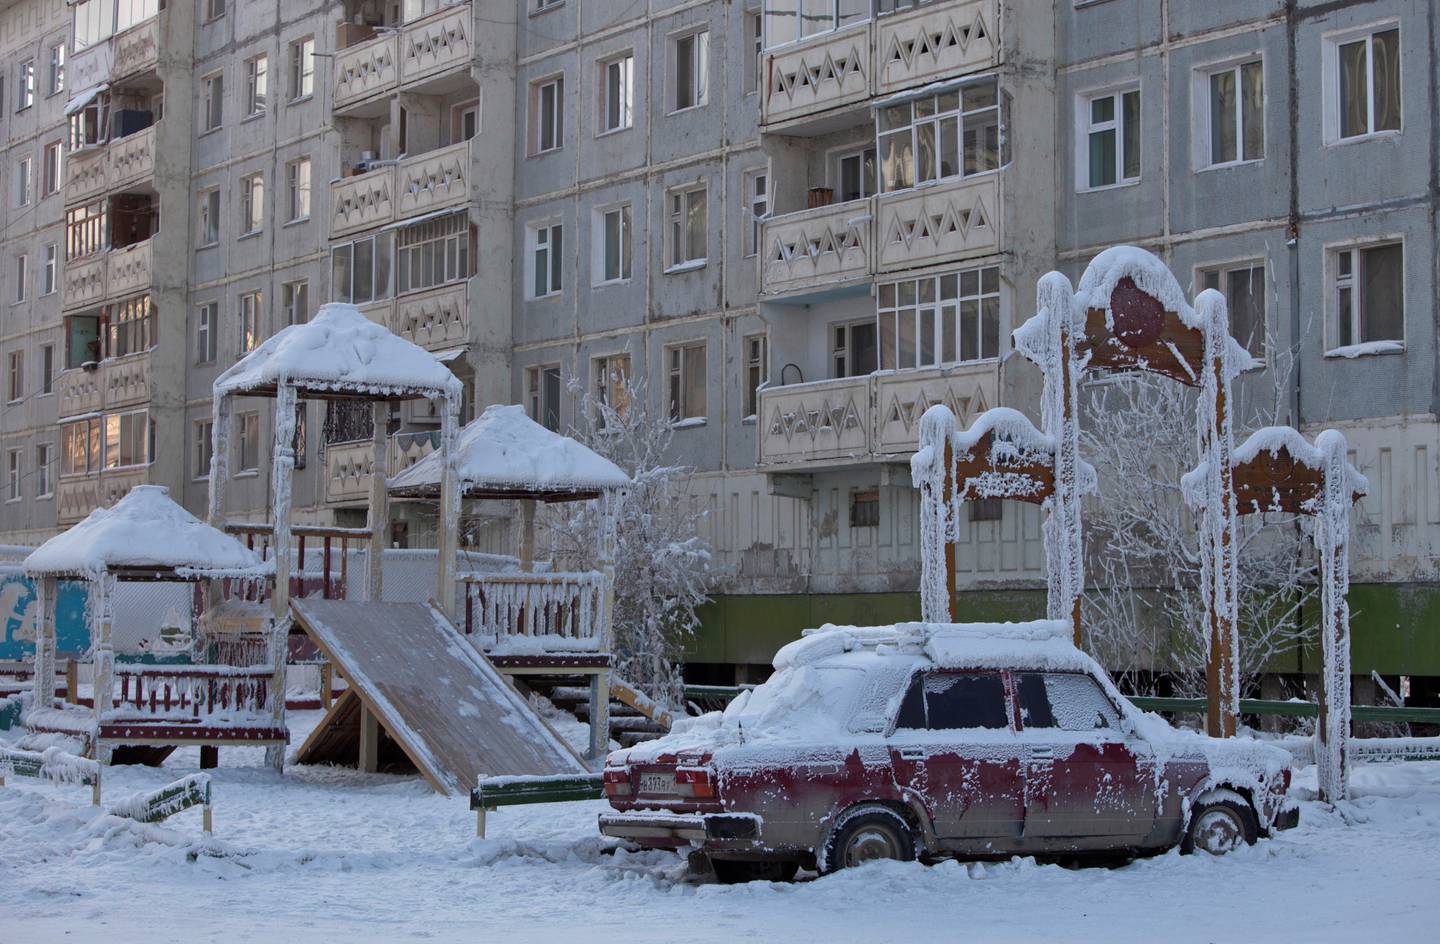 A car covered in ice is pictured near a playground in Yakutsk, in the Republic of Sakha in February 2013. Reuters